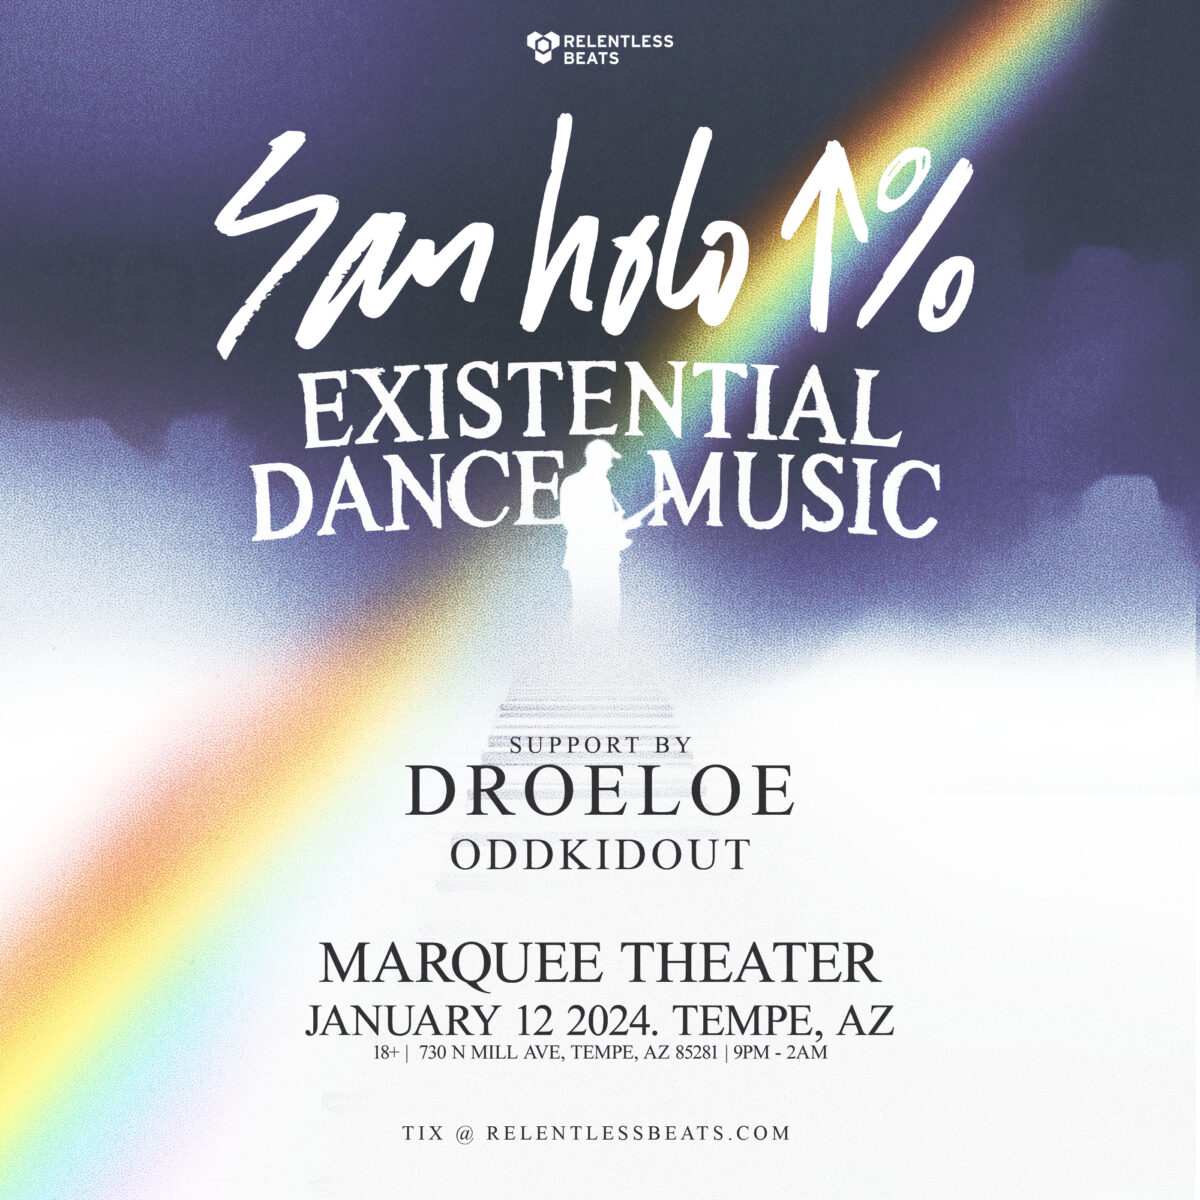 Flyer for San Holo